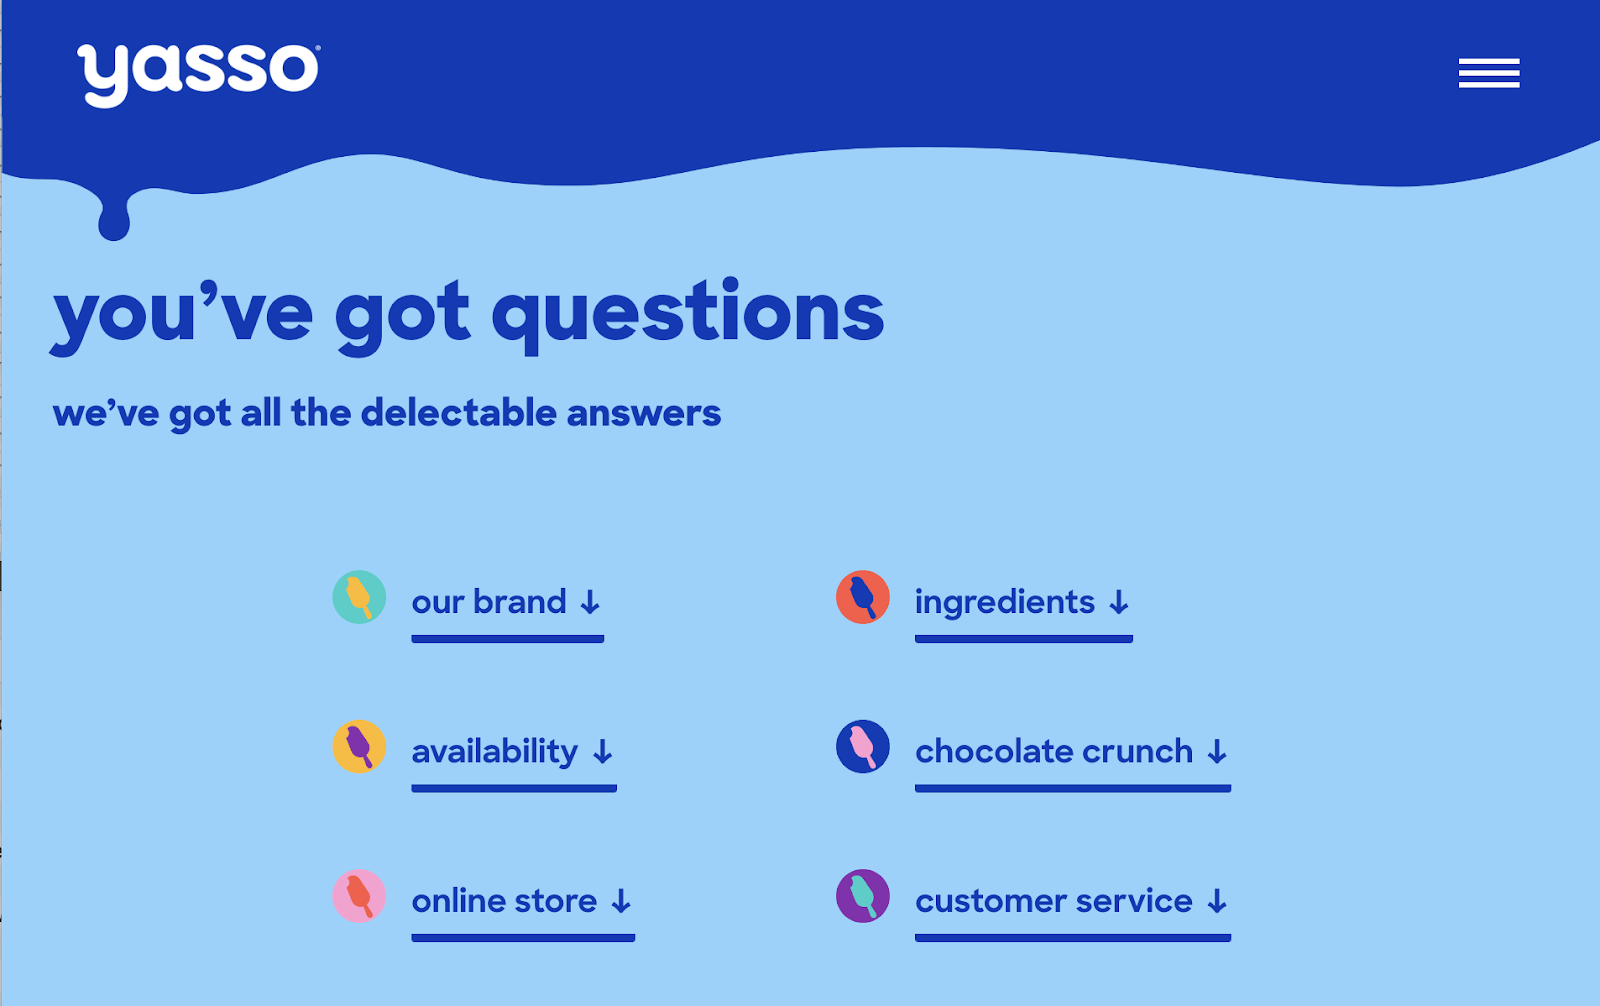 yasso lists topics to help you navigate the faqs such as ingredients, availability, and the brand